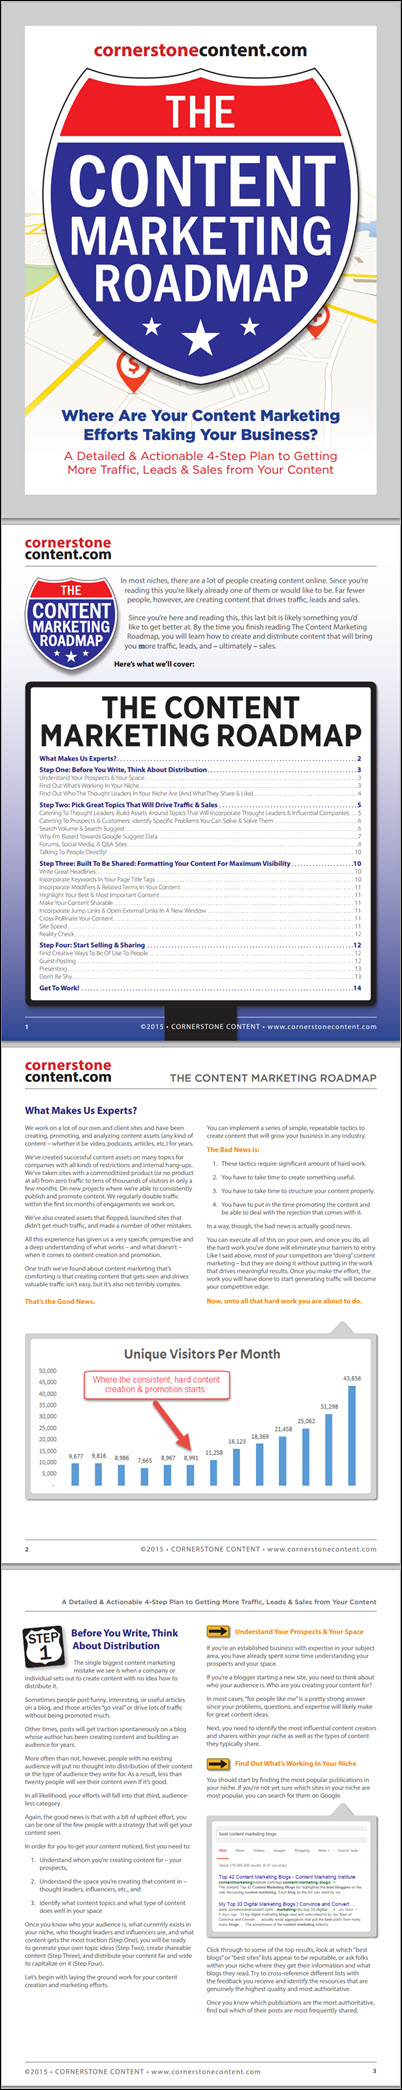 Example image of The Content Marketing Roadmap PDF